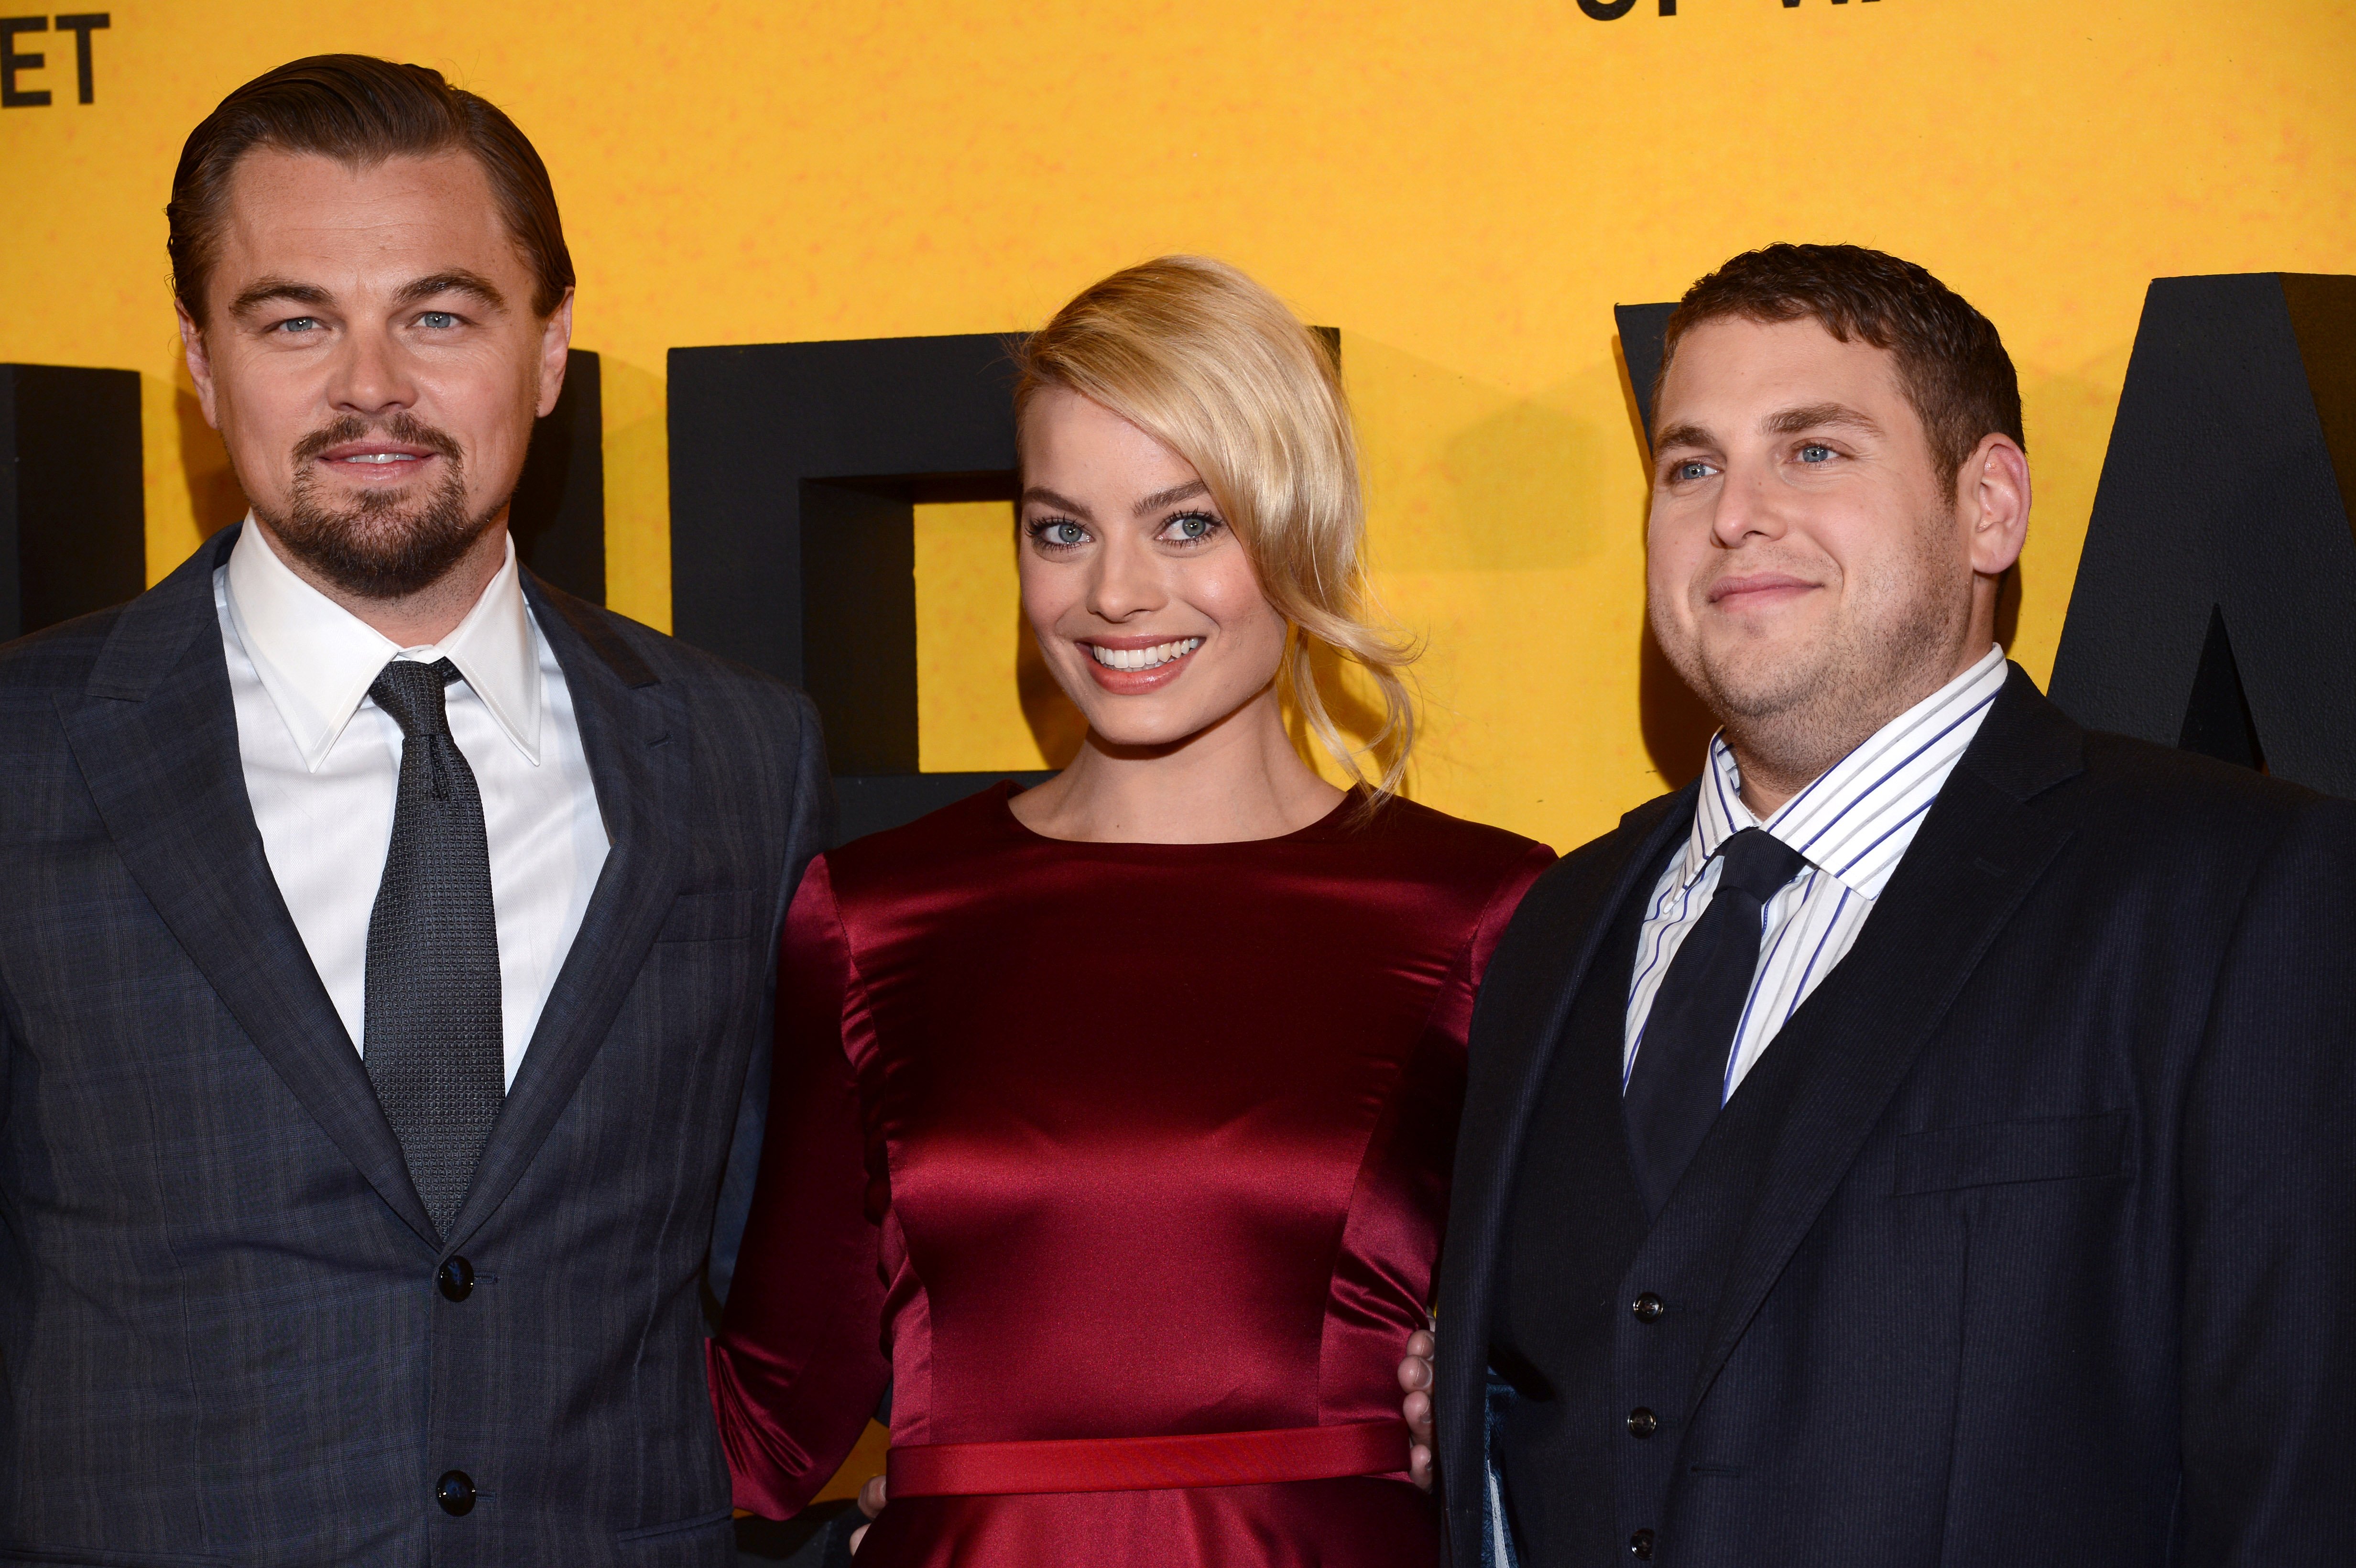 Leonardo DiCaprio, Margot Robbie and Jonah Hill attend the UK Premiere of "The Wolf Of Wall Street" at the Odeon Leicester Square on January 9, 2014 in London, England. 